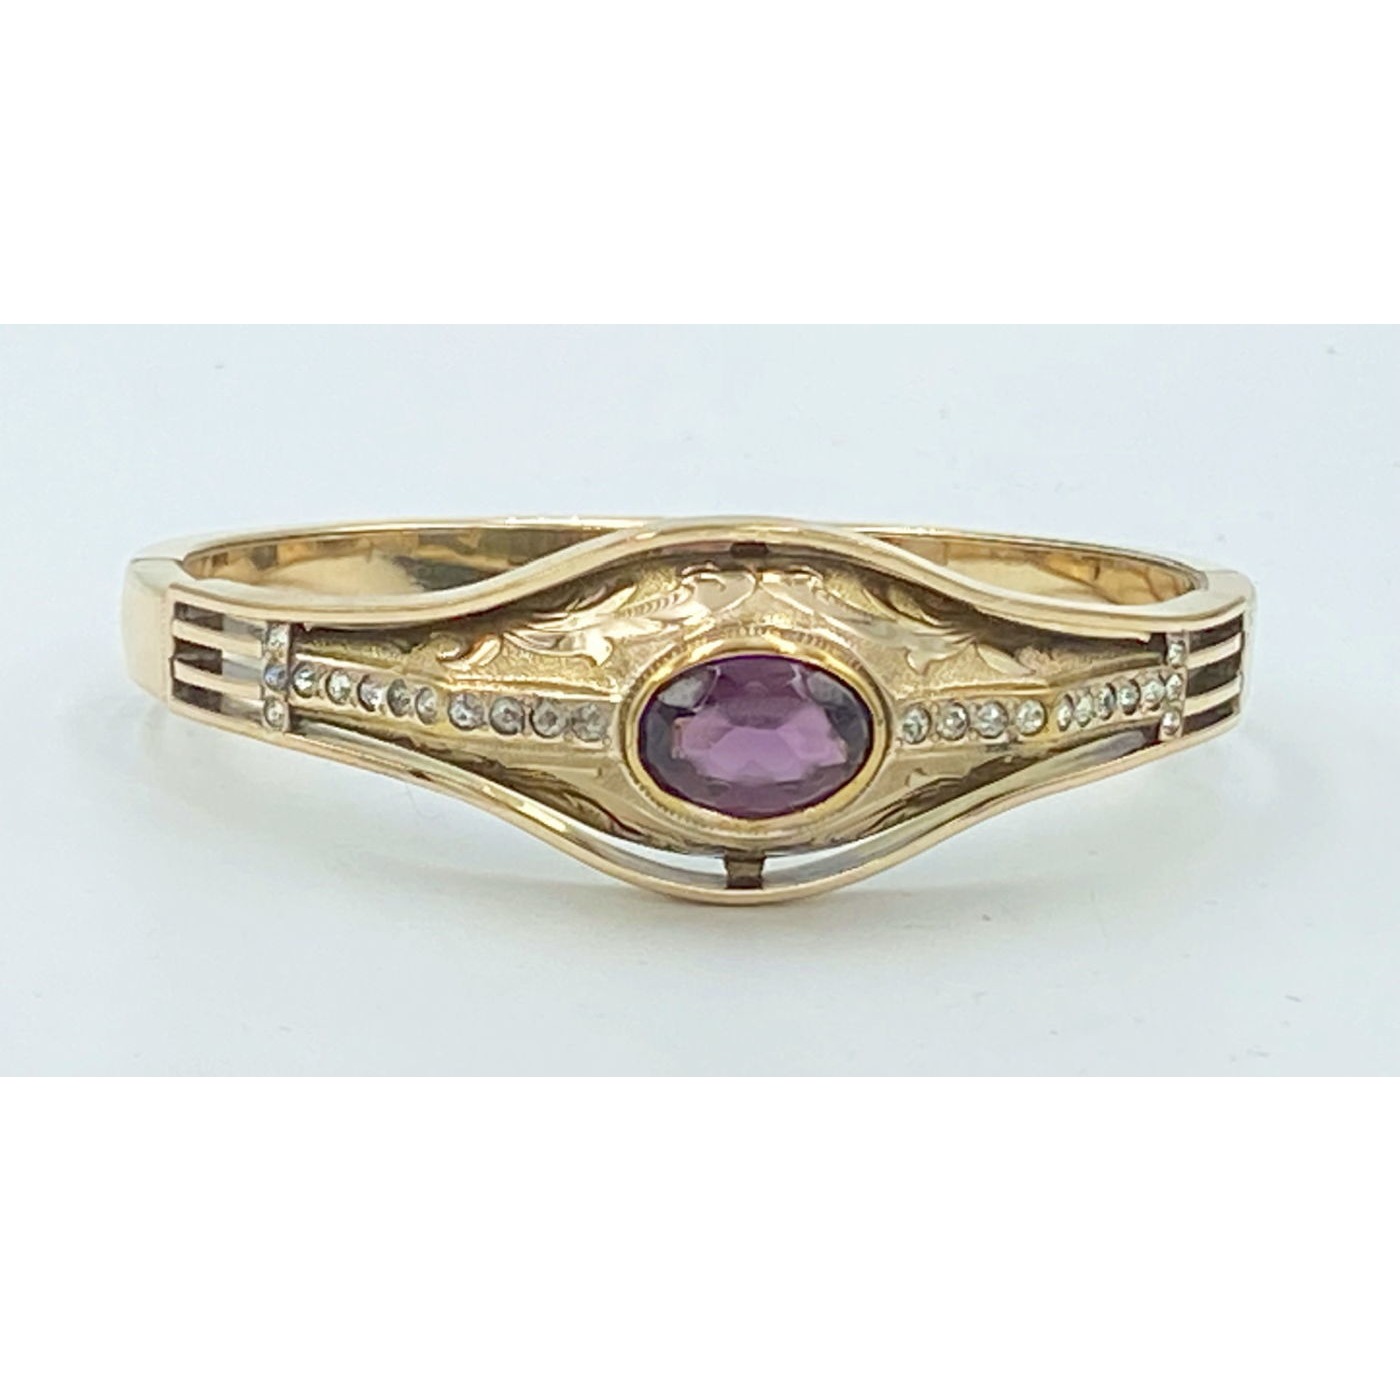 Deep Center Purple with Extending Clear Sets Gold-Filled Bangle